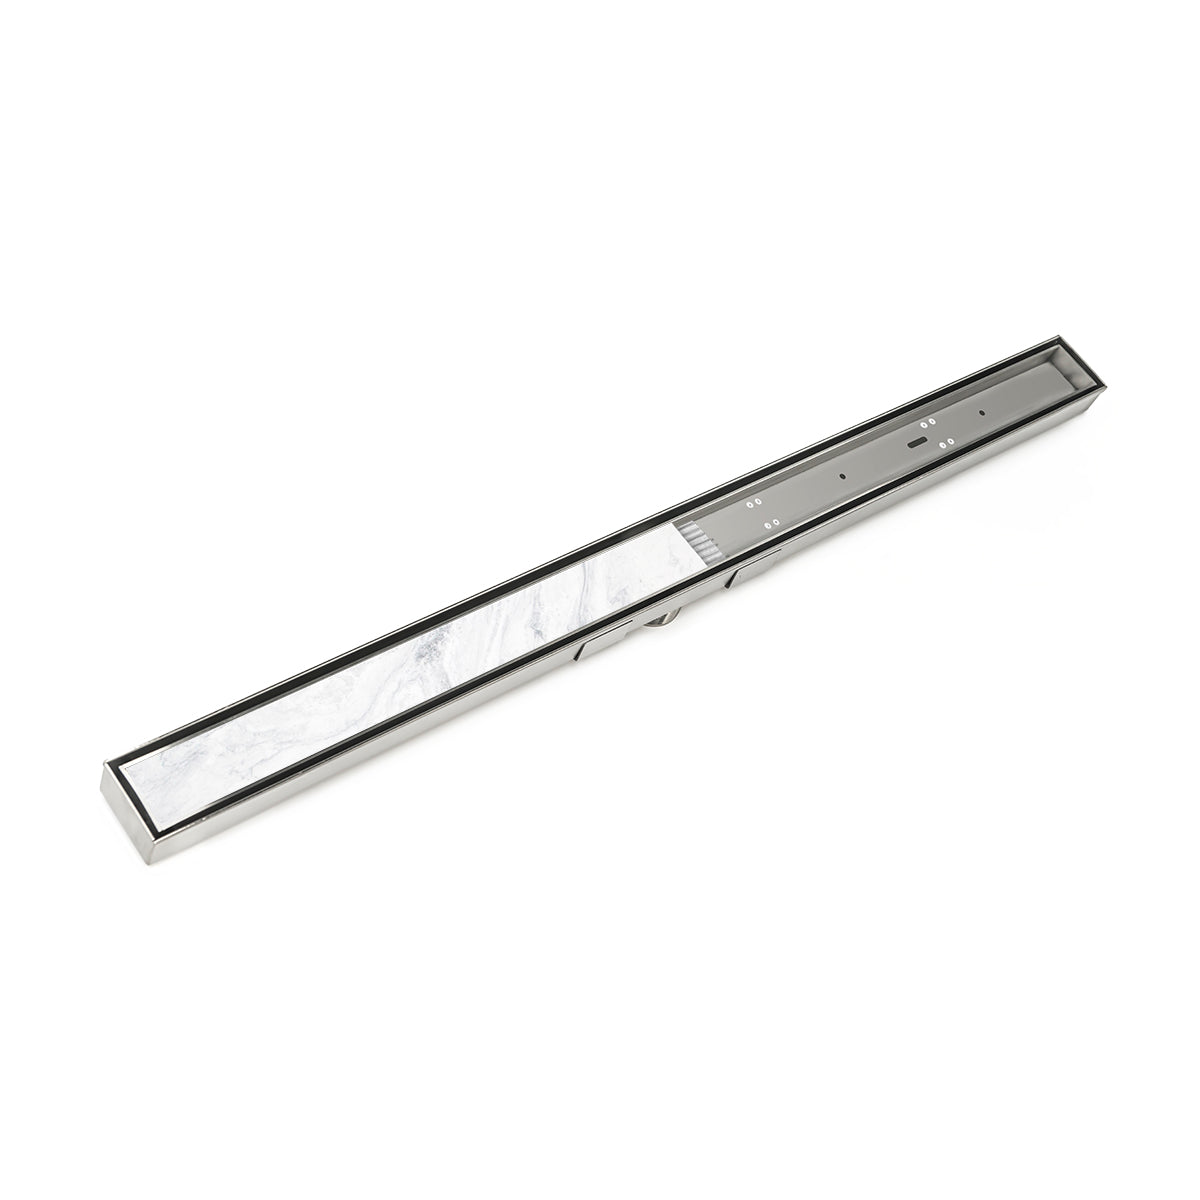 Infinity Drain 48" S-Stainless Steel Series High Flow Site Sizable Linear Drain Kit with Low Profile Tile Insert Frame with PVC Drain Body, 3" Outlet